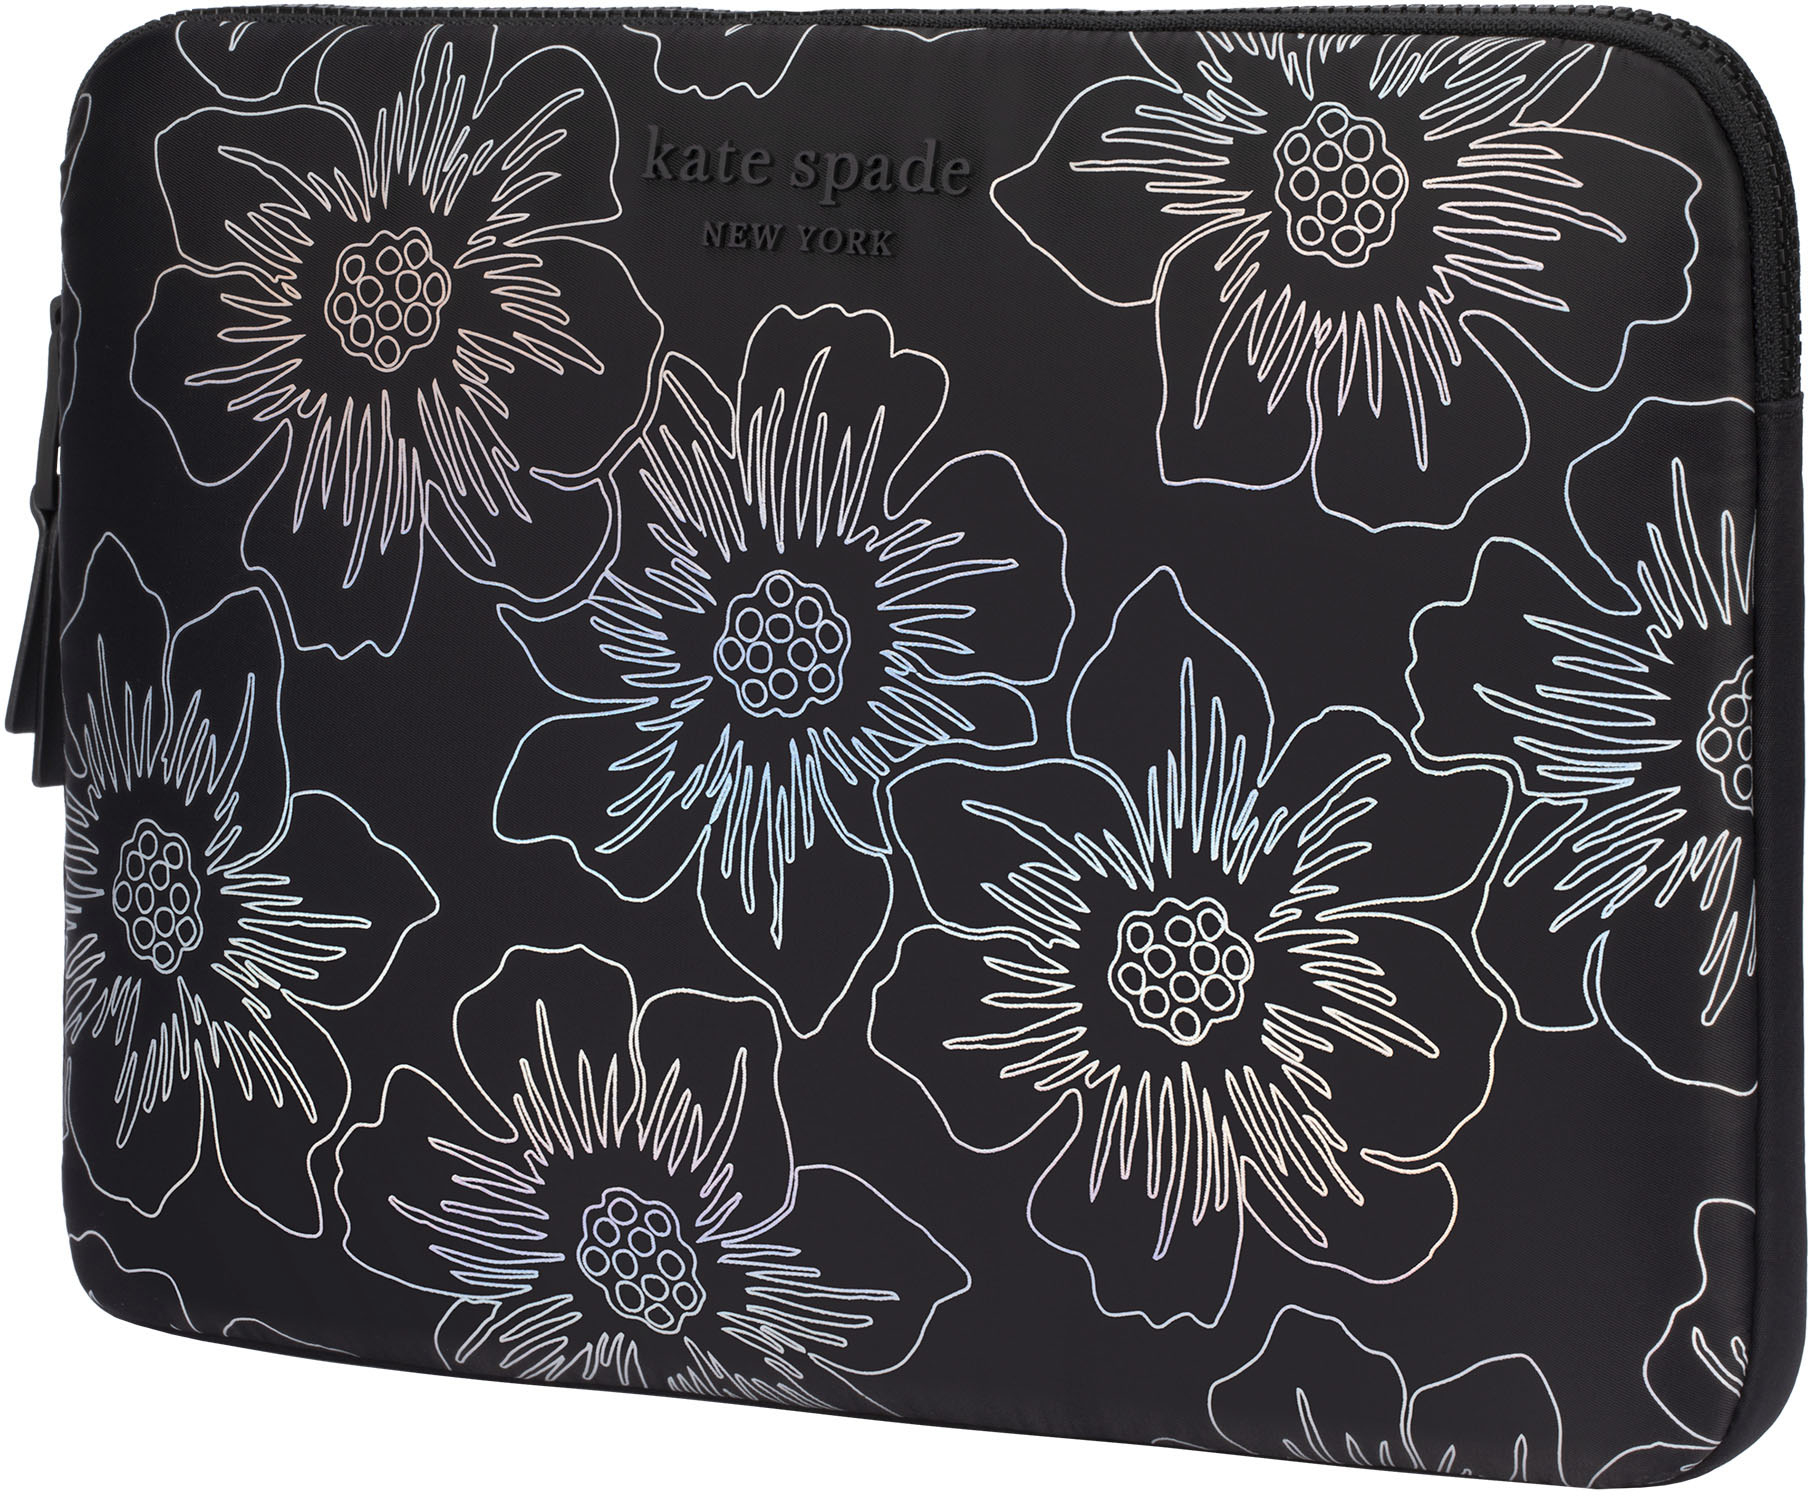 respektfuld by overflade kate spade new york Laptop Sleeve for for 15"-16" Hollyhock KSMB-025-HHIRB  - Best Buy